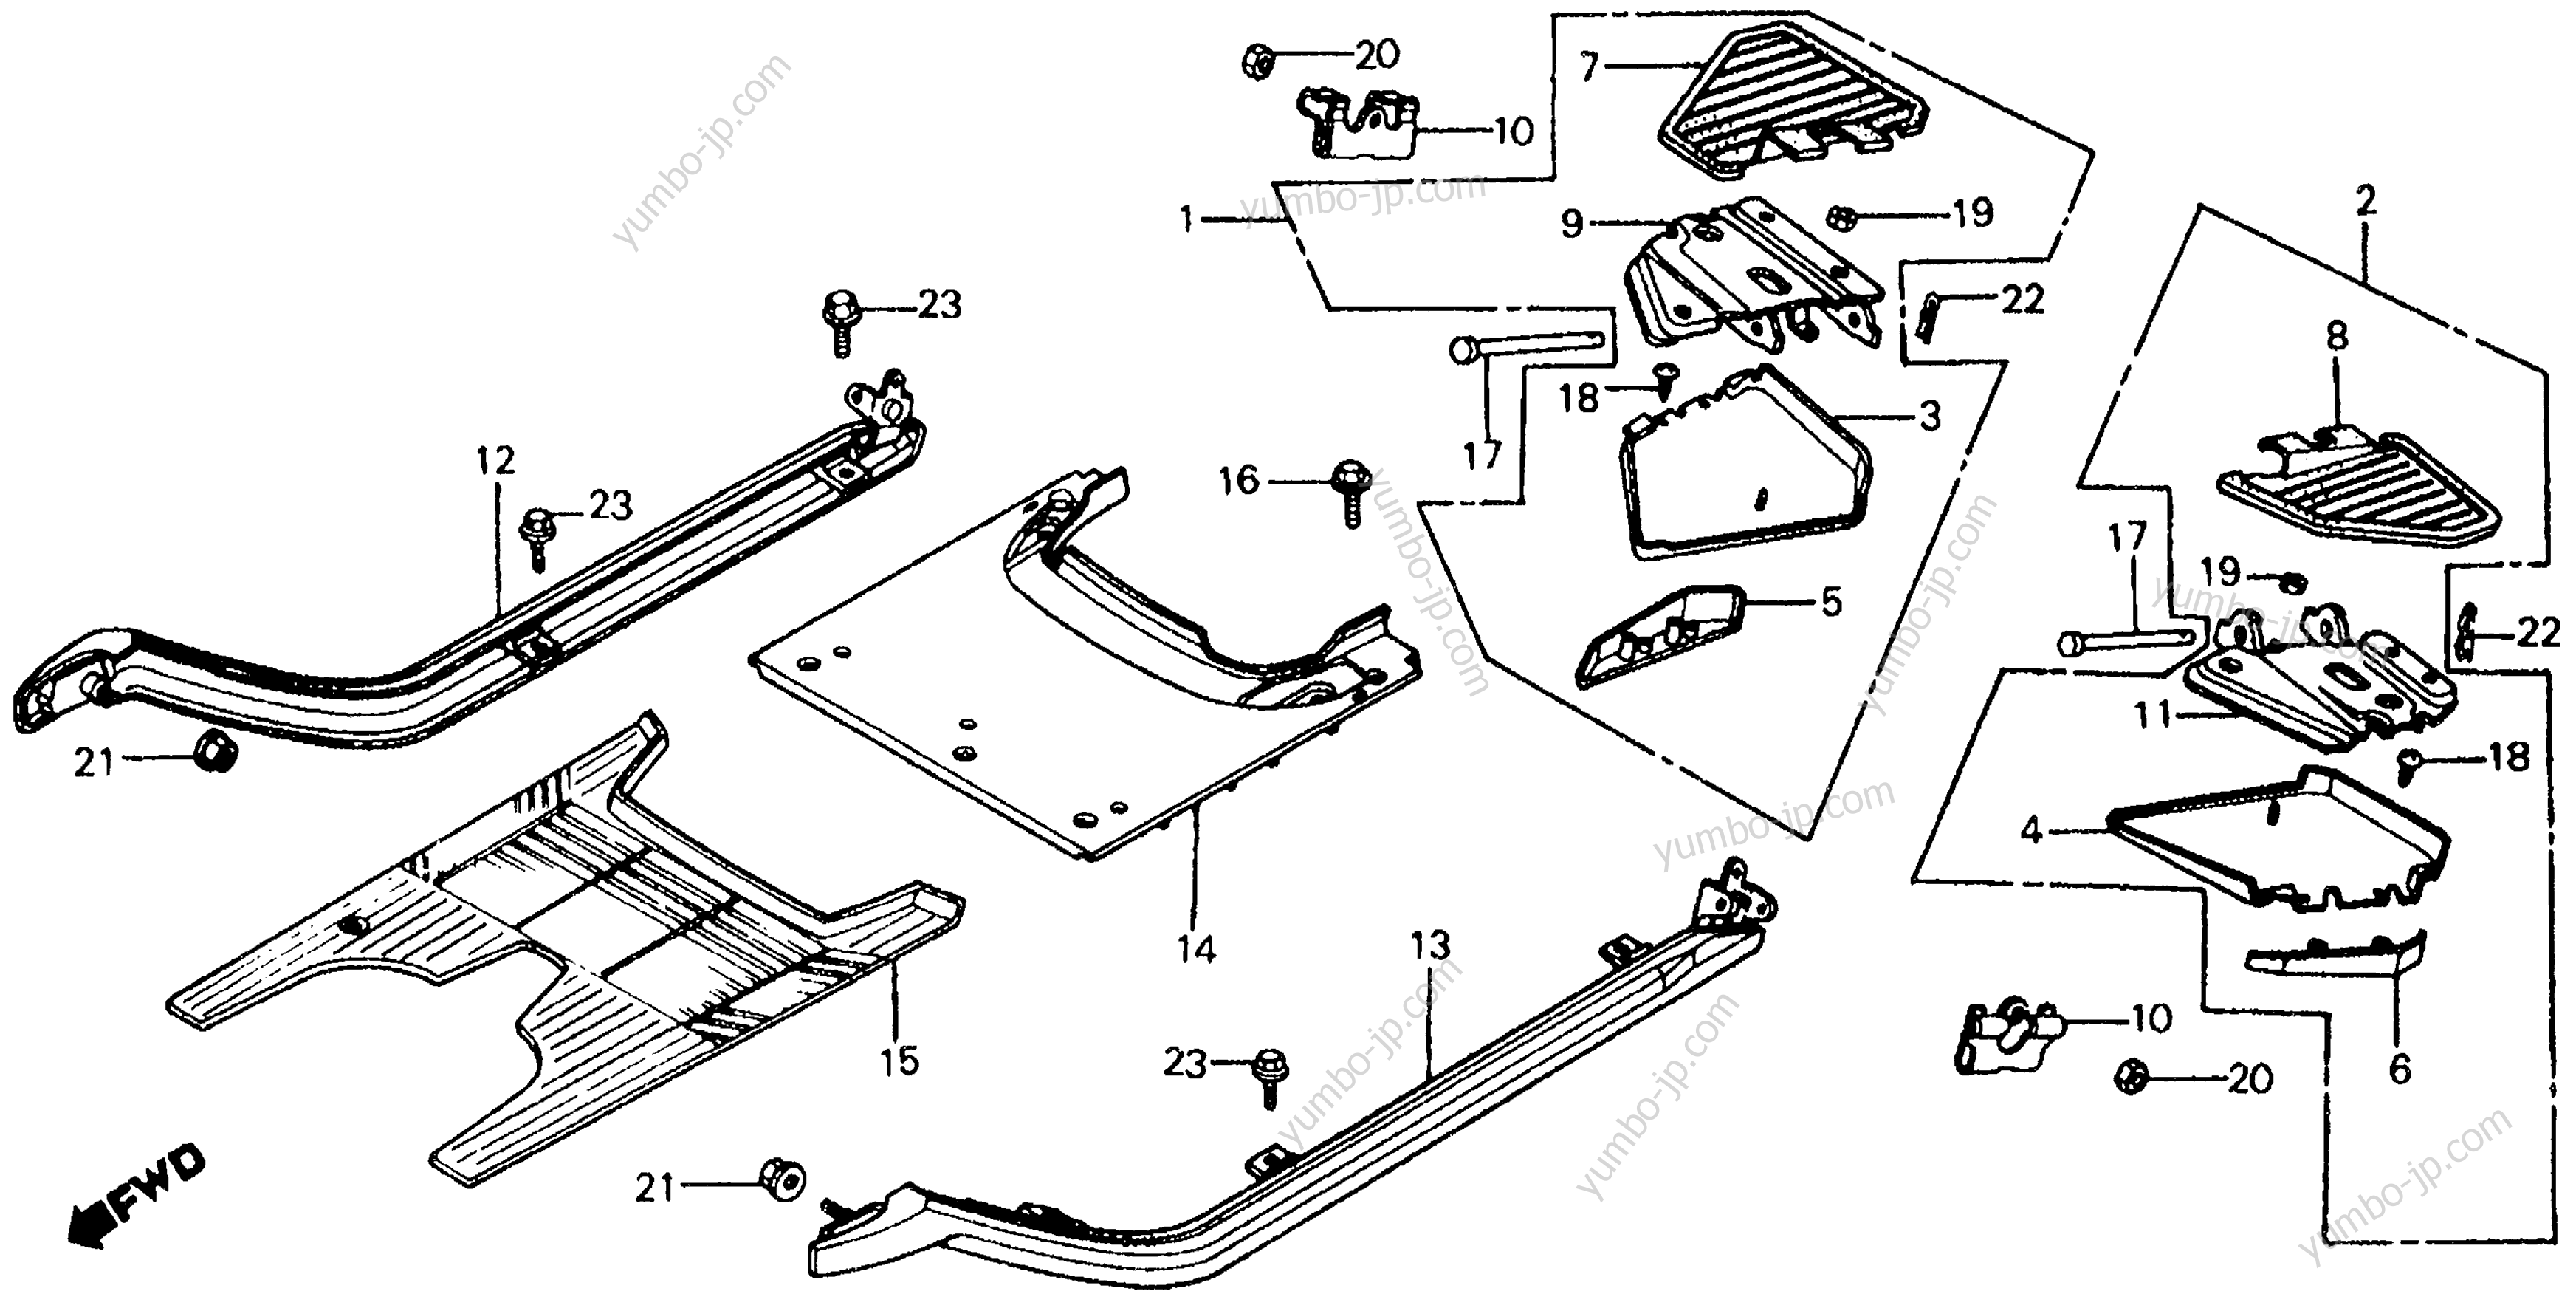 SIDE RAIL / FLOOR PANEL / STEP for scooters HONDA CH125 AC 1984 year